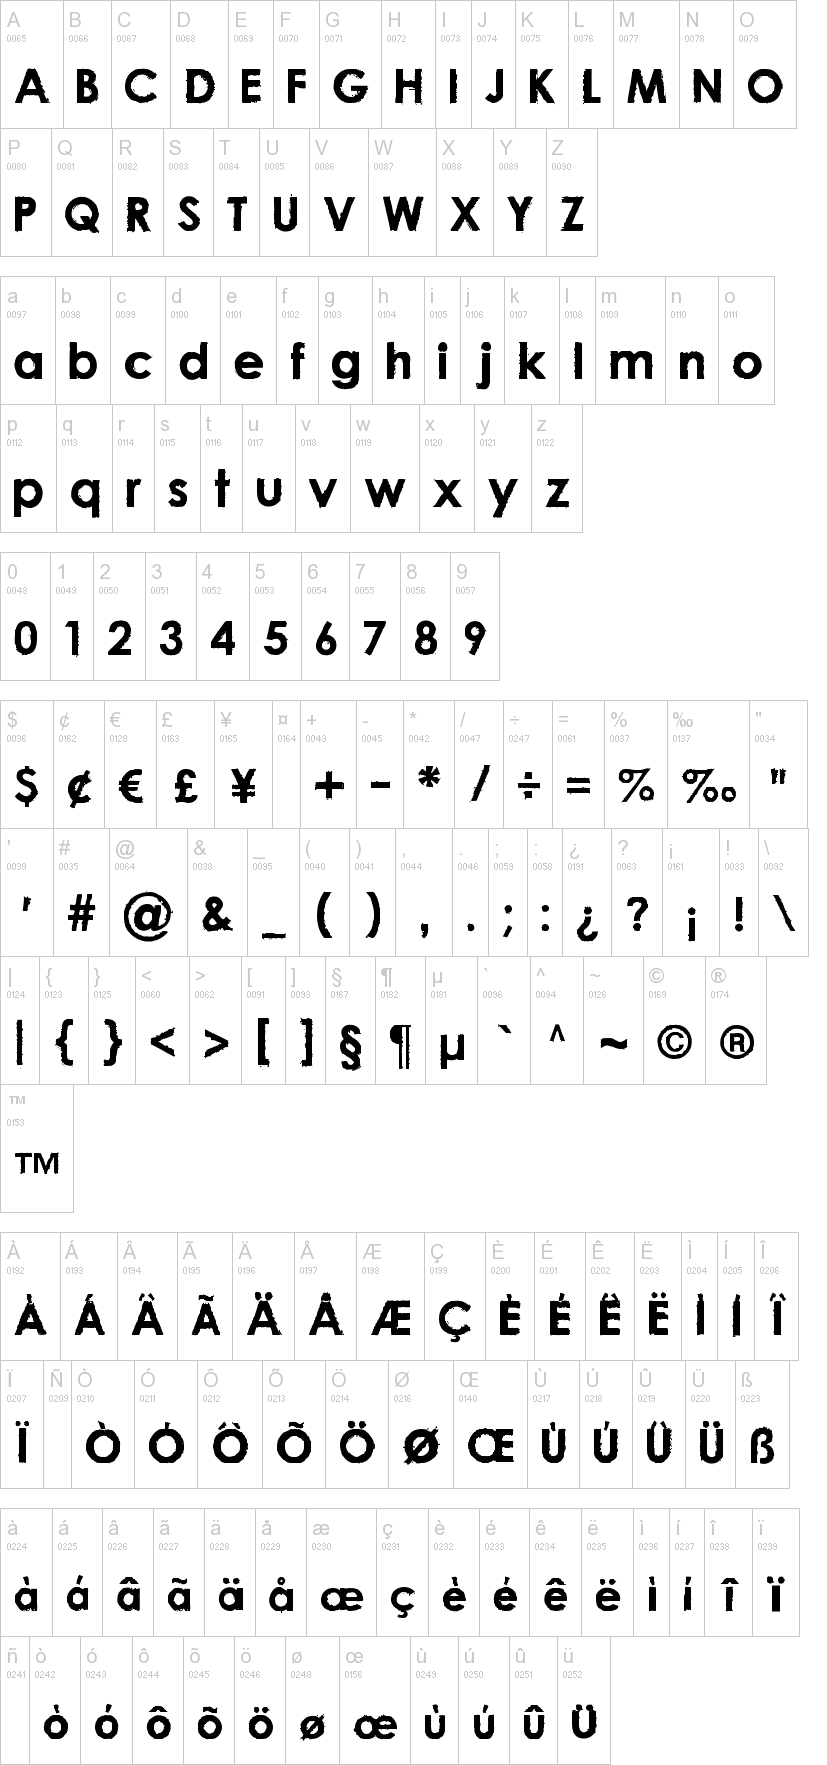 century gothic free font for mac